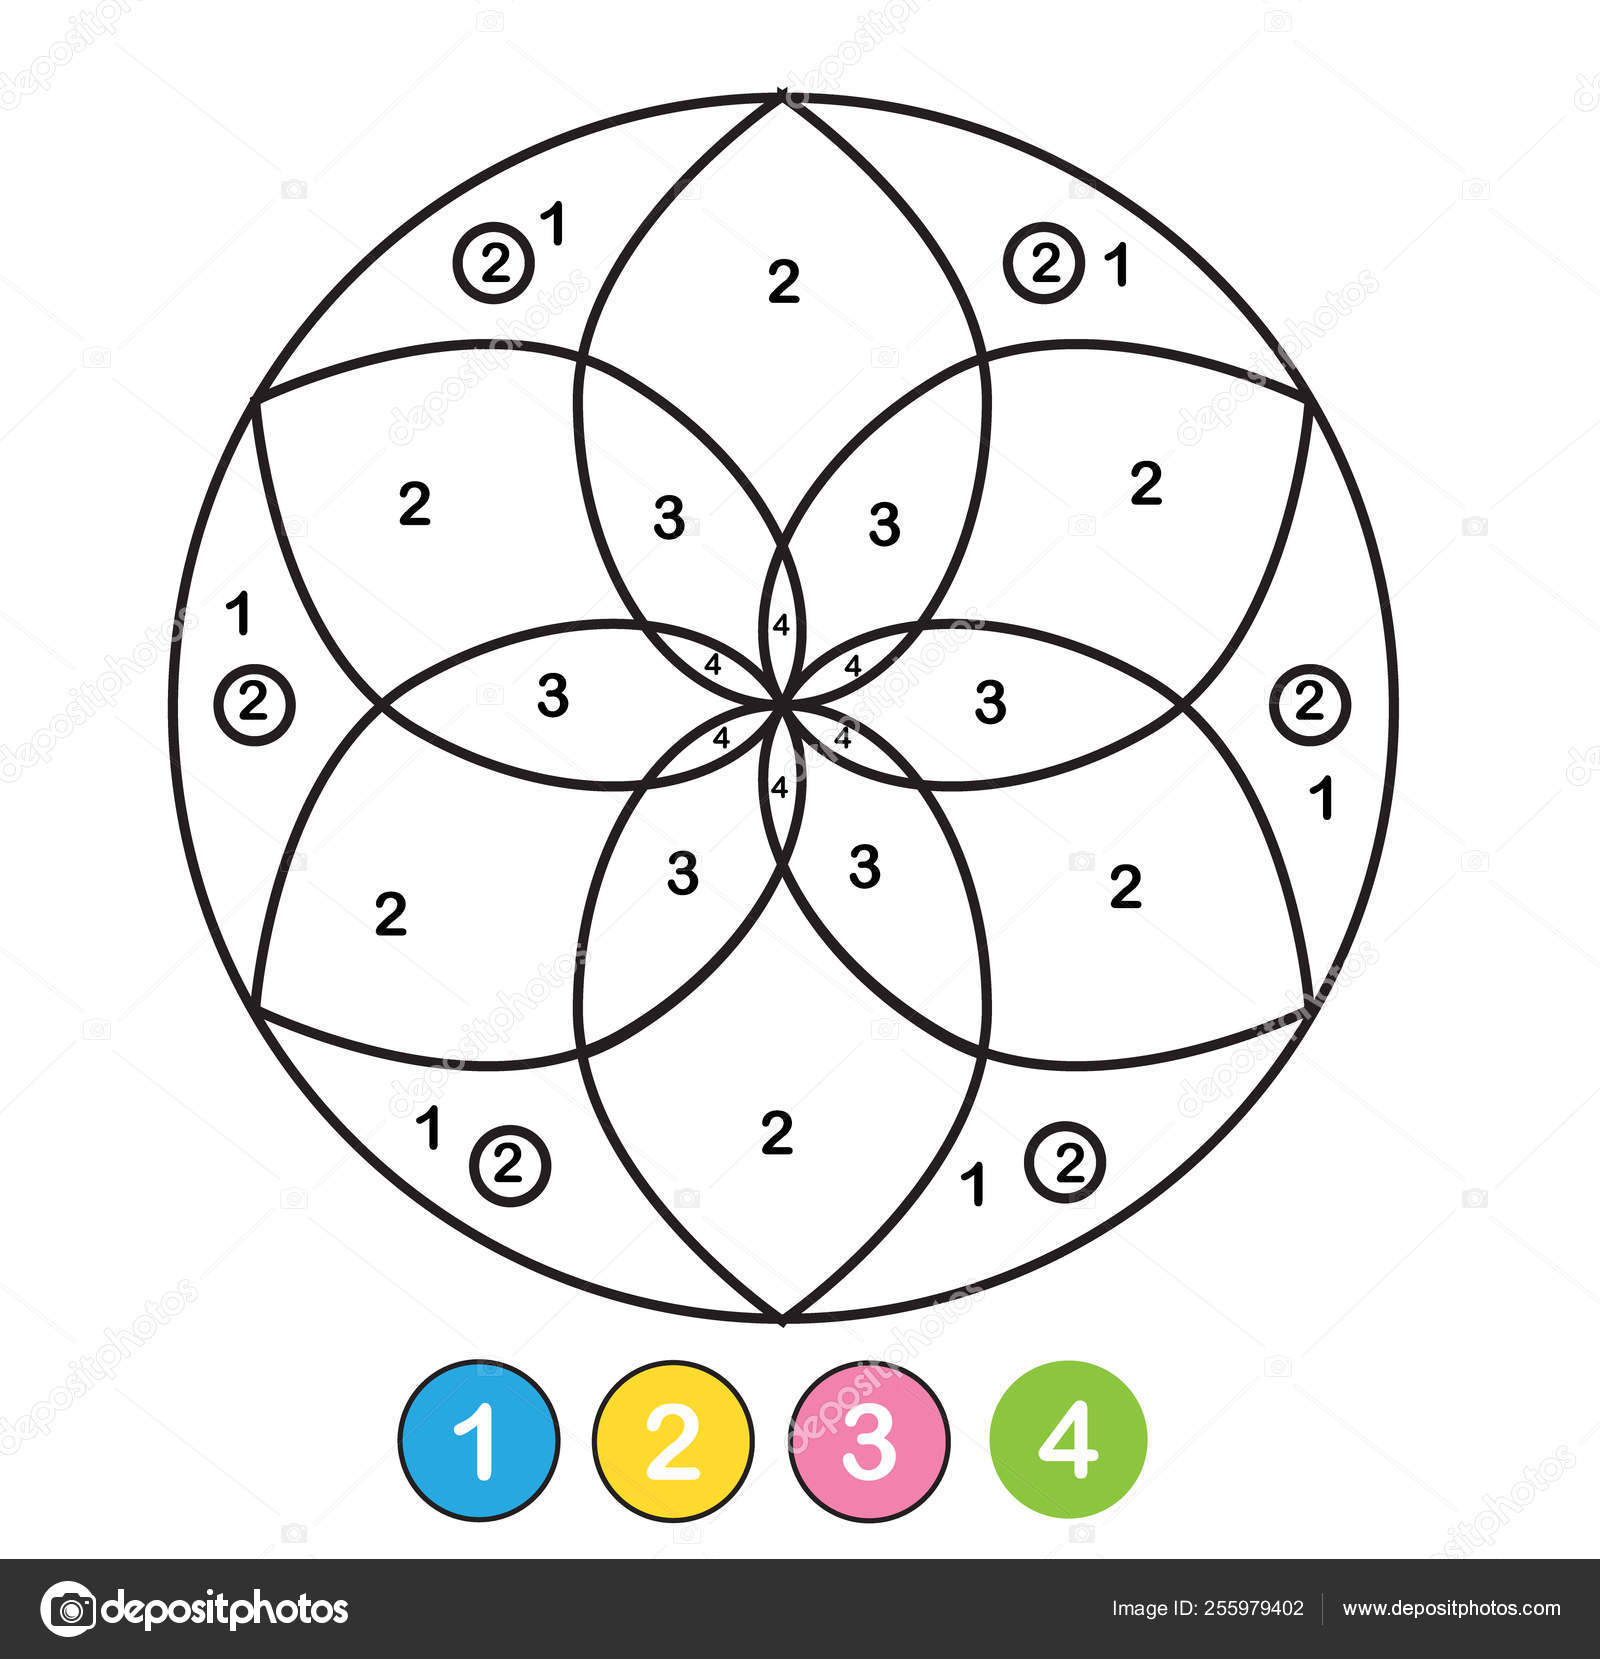 Numbers Coloring Page Coloring Page Color Numbers Picture For Toddlers And Kids